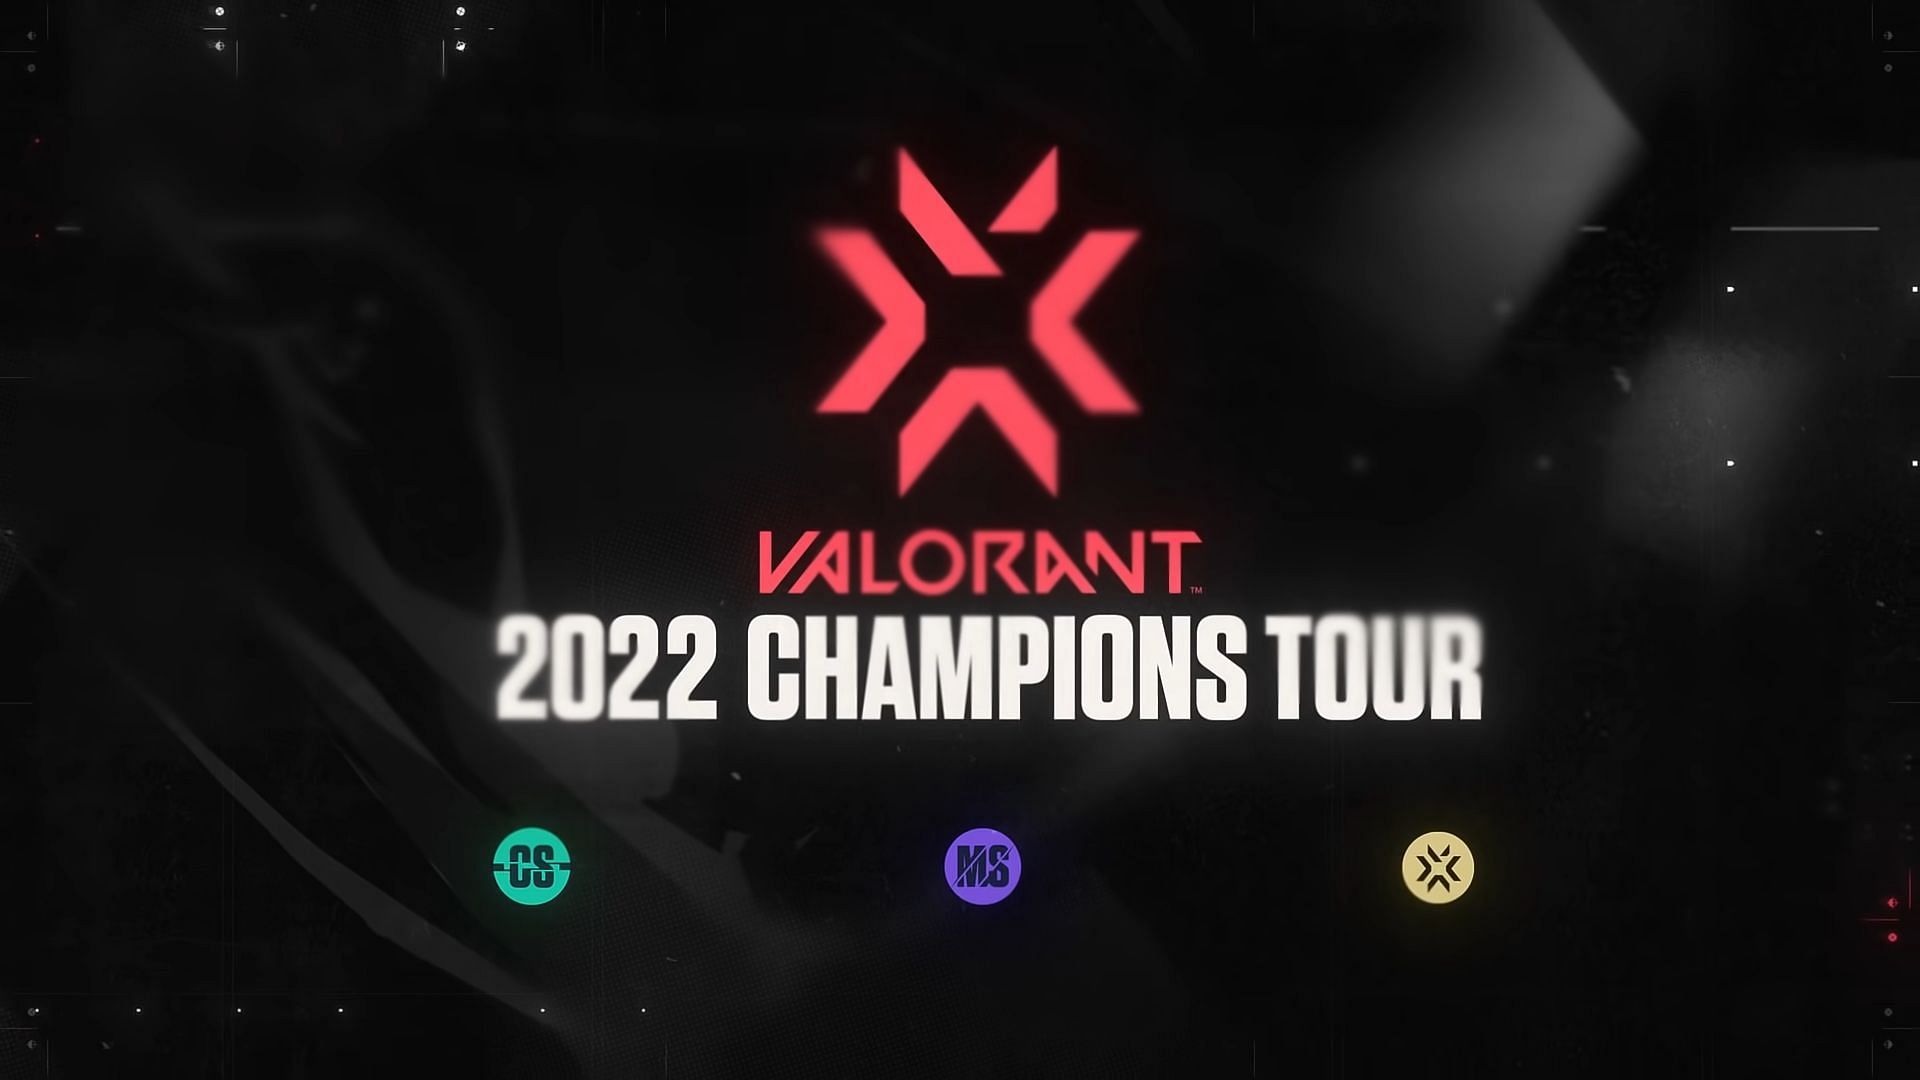 Valorant Champions Tour (VCT) 2022 Format, schedule and more